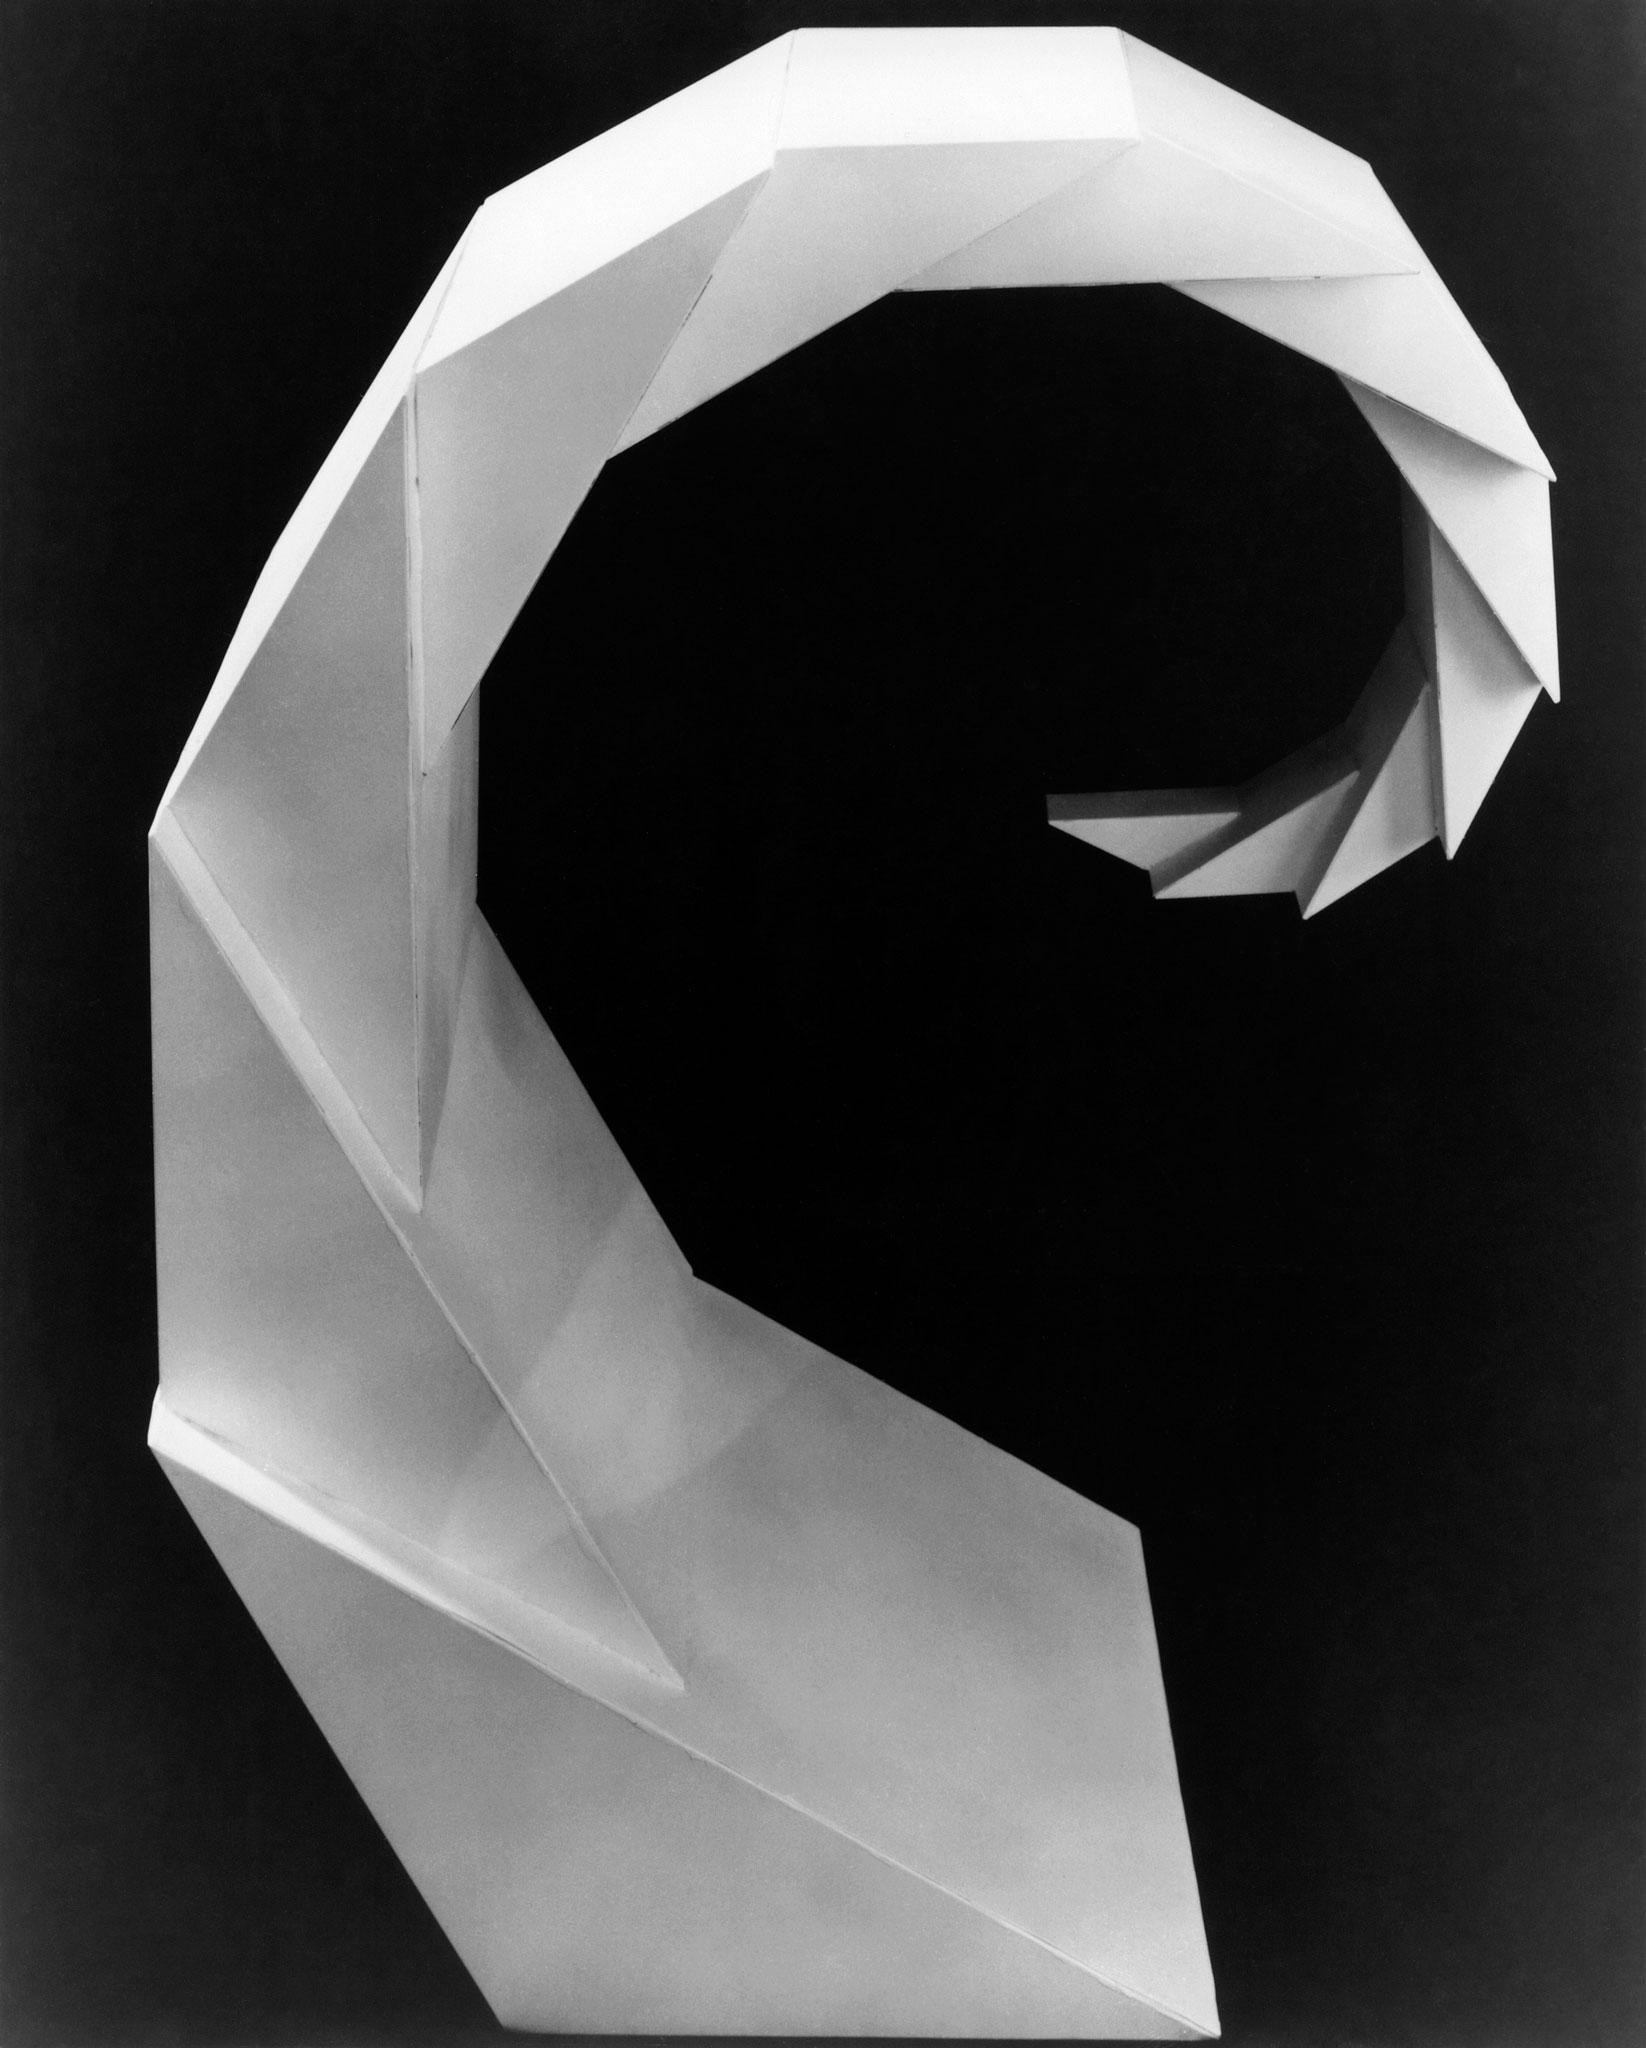 black and white image of geometric, faceted spiraling sculpture 